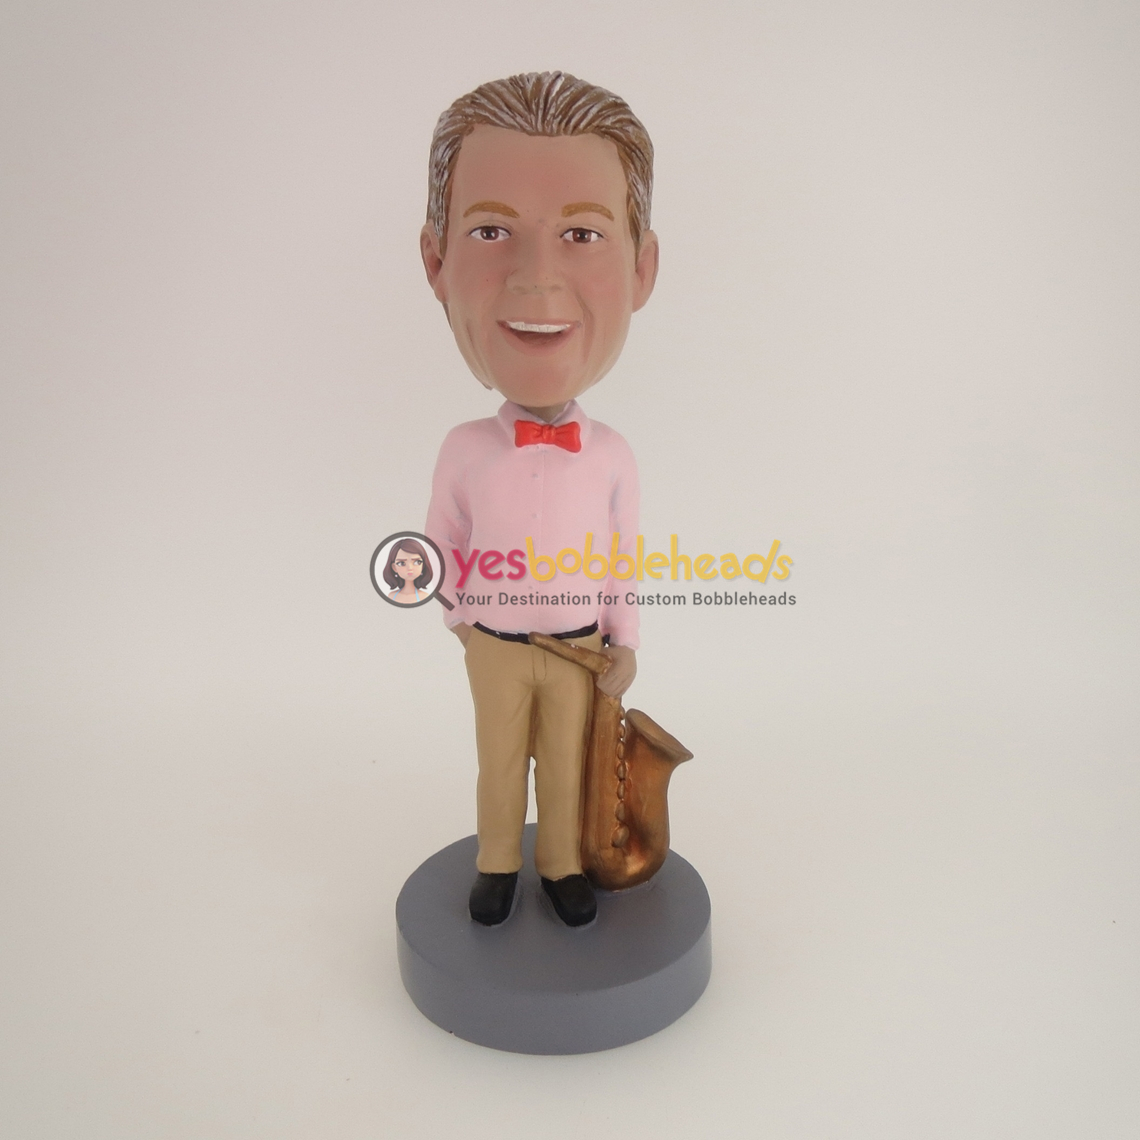 Picture of Custom Bobblehead Doll: Man Standing With Sax